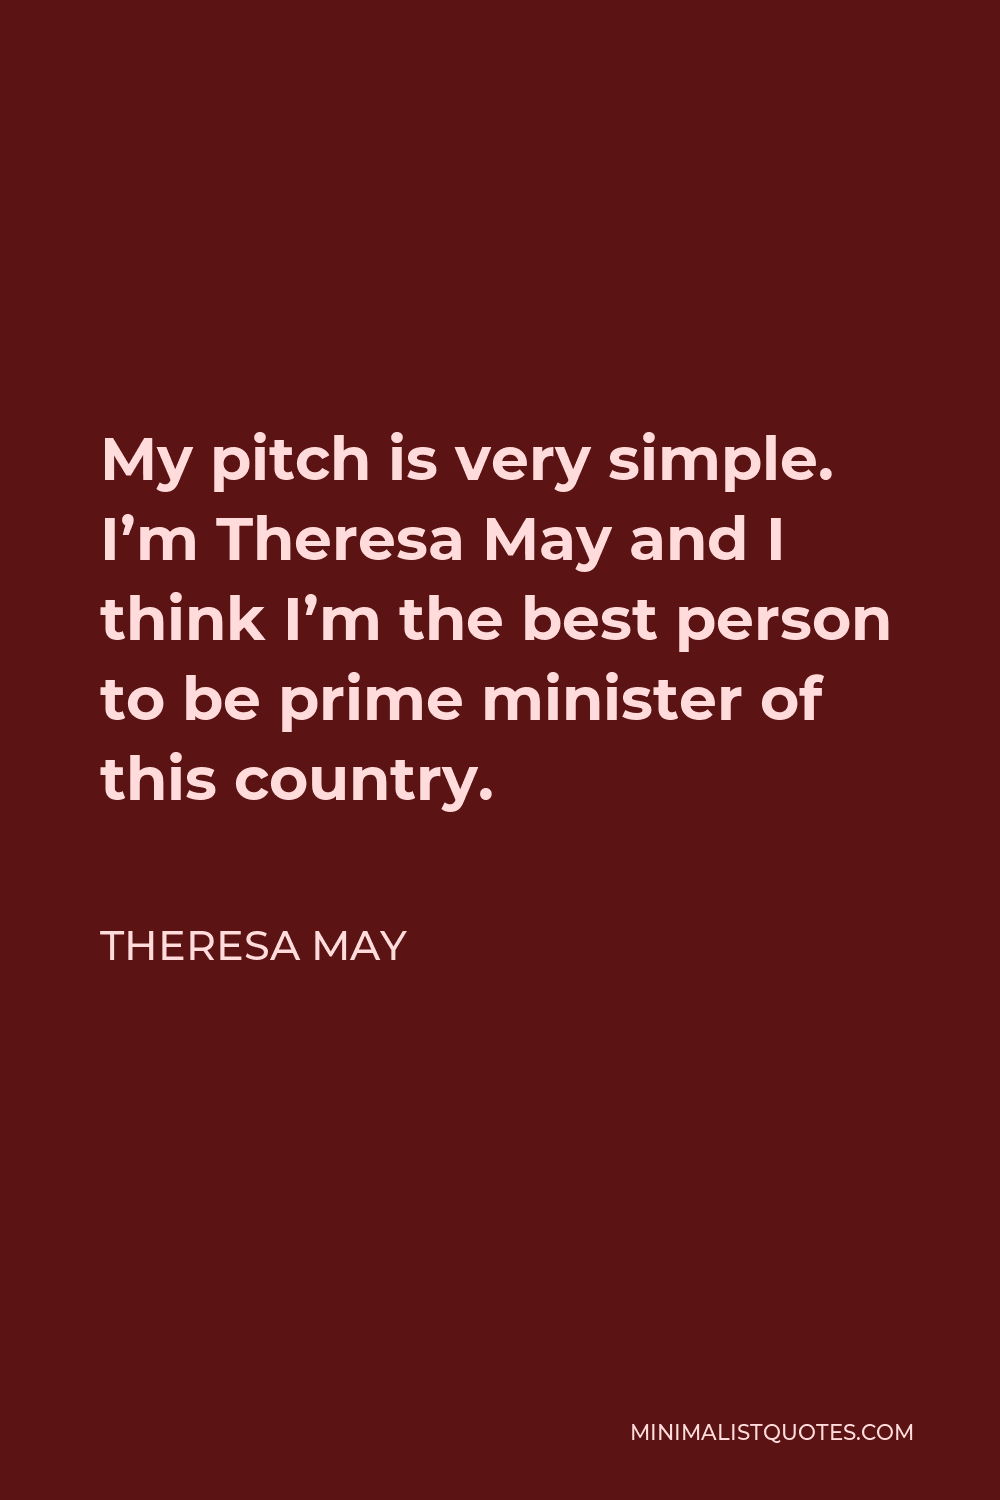 Theresa May Quote - My pitch is very simple. I’m Theresa May and I think I’m the best person to be prime minister of this country.